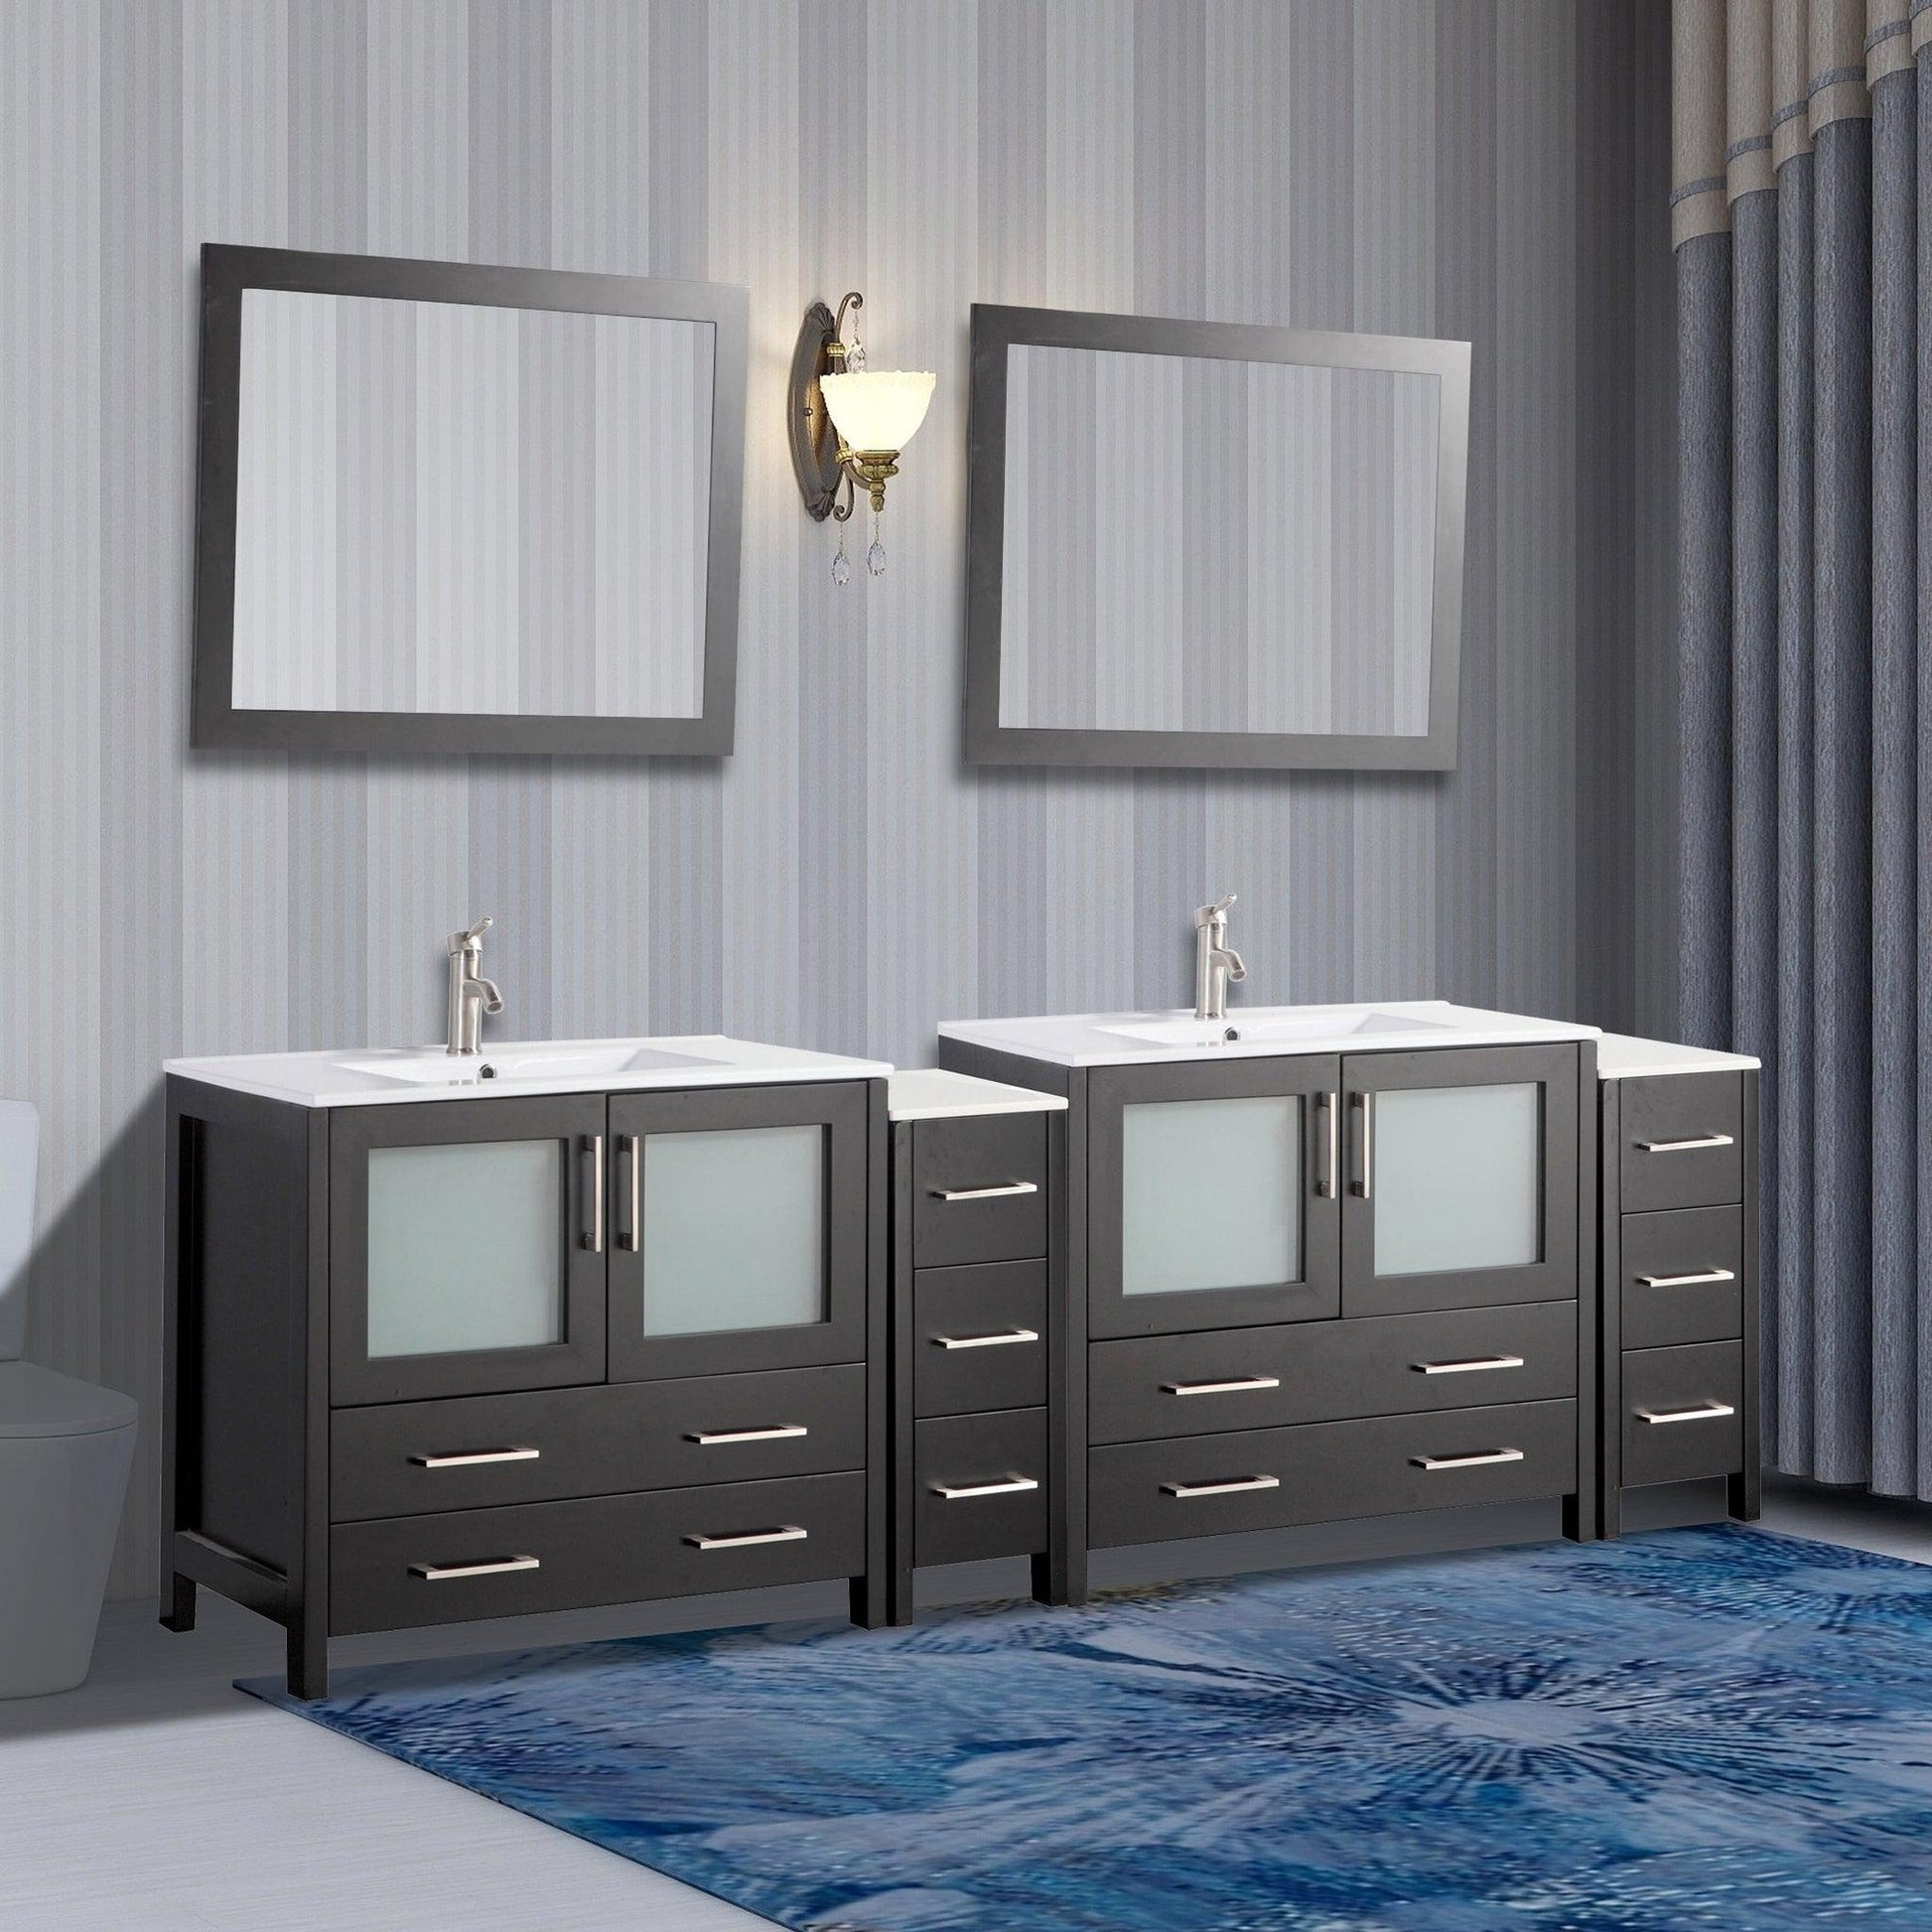 Vanity Art Brescia 96" Double Espresso Freestanding Modern Bathroom Vanity Set With Ceremic Top, 2-Side Cabinets and 2 Mirrors